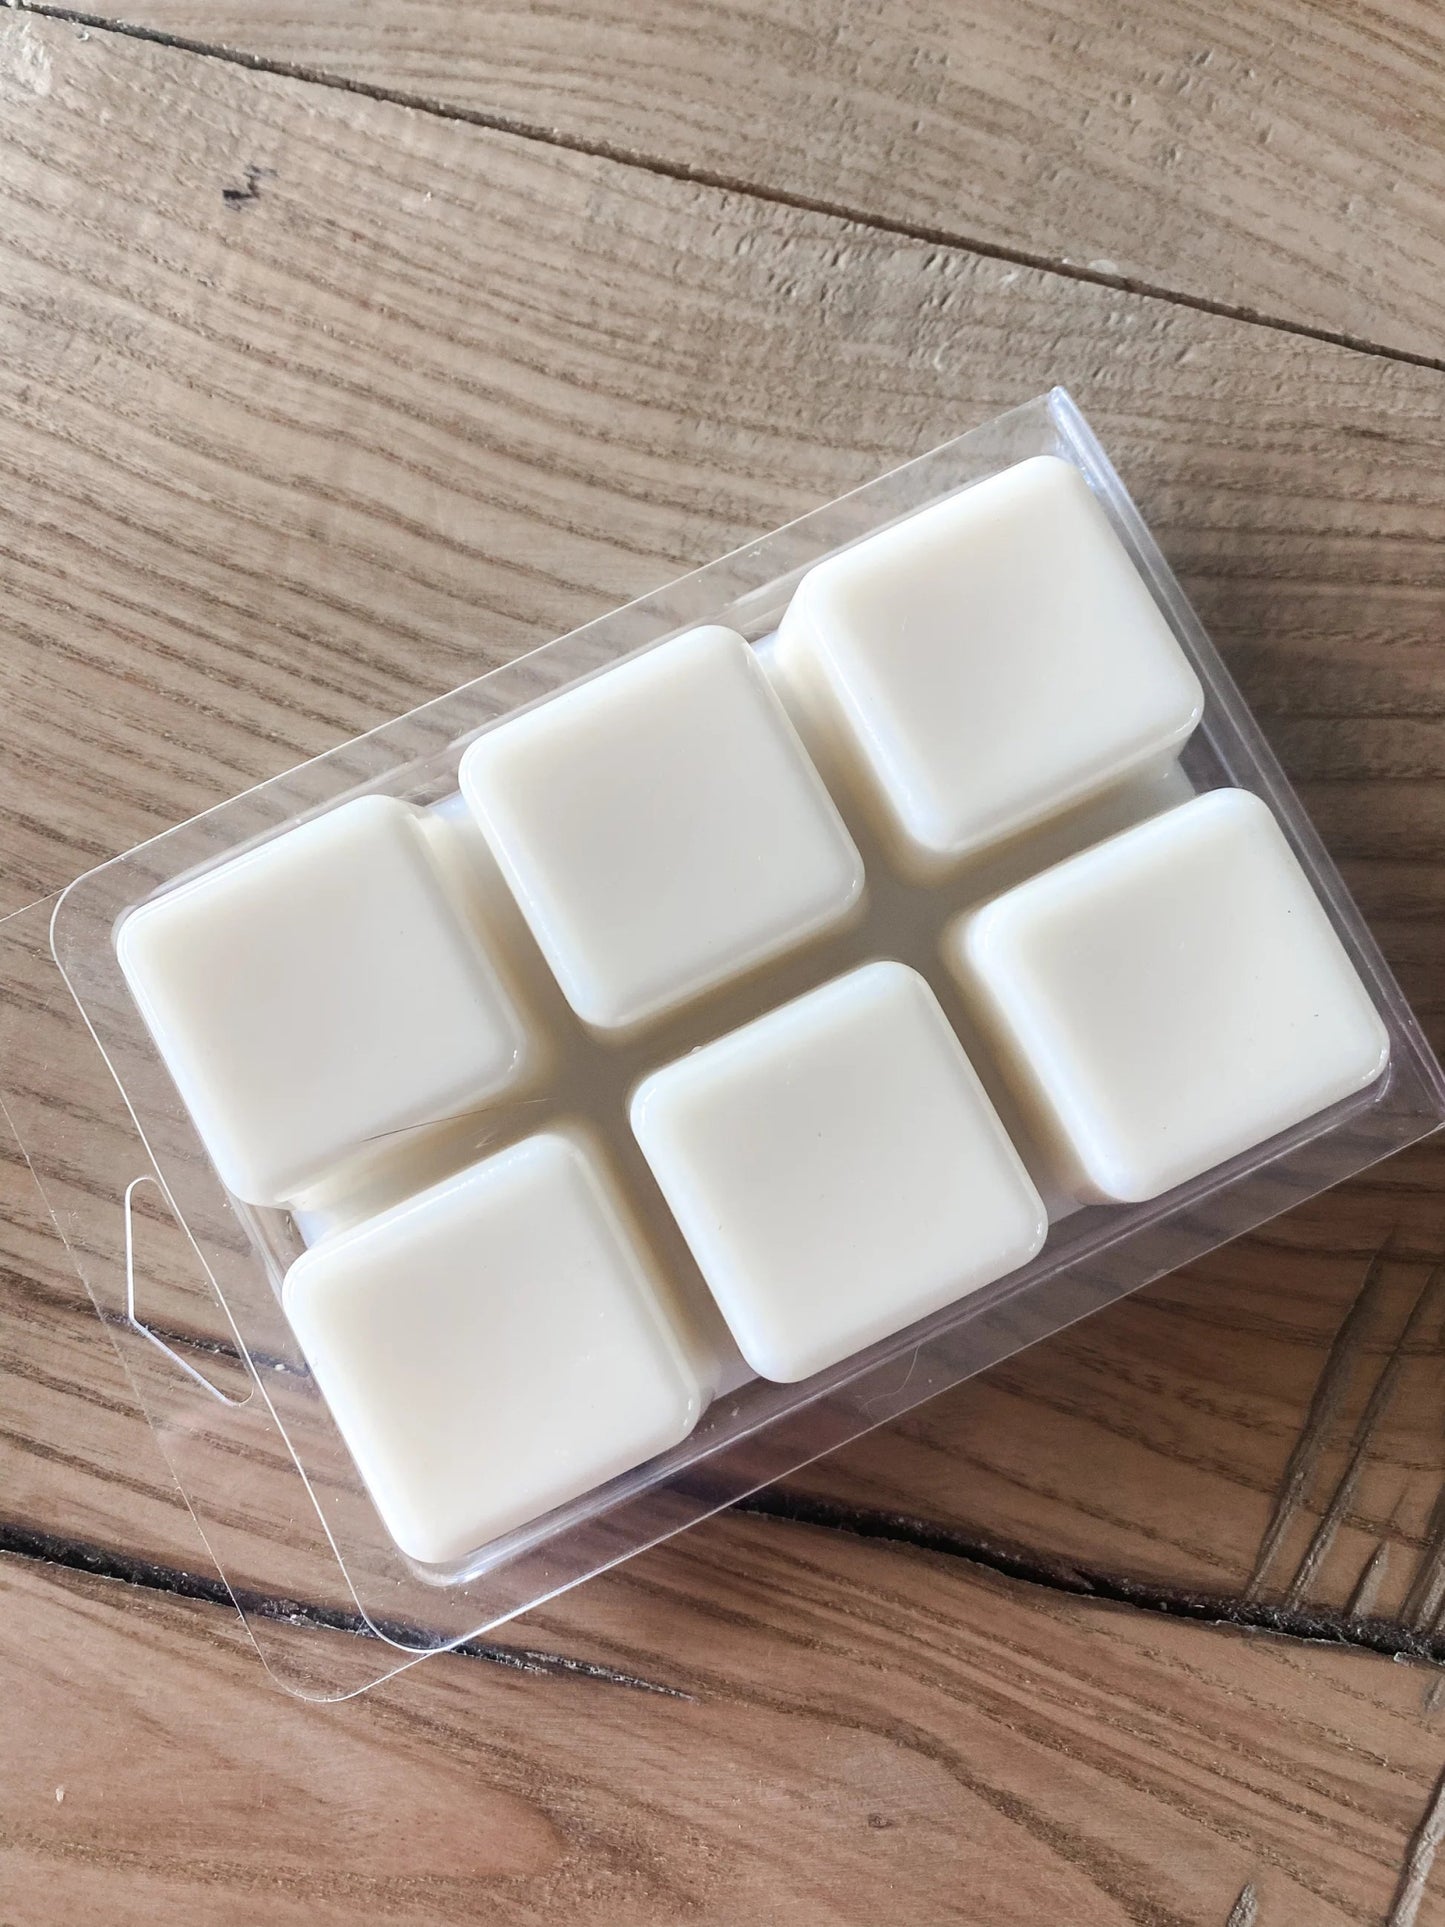 Lakeside Lime Wax Melts - Grizzly Naturals Soap Company